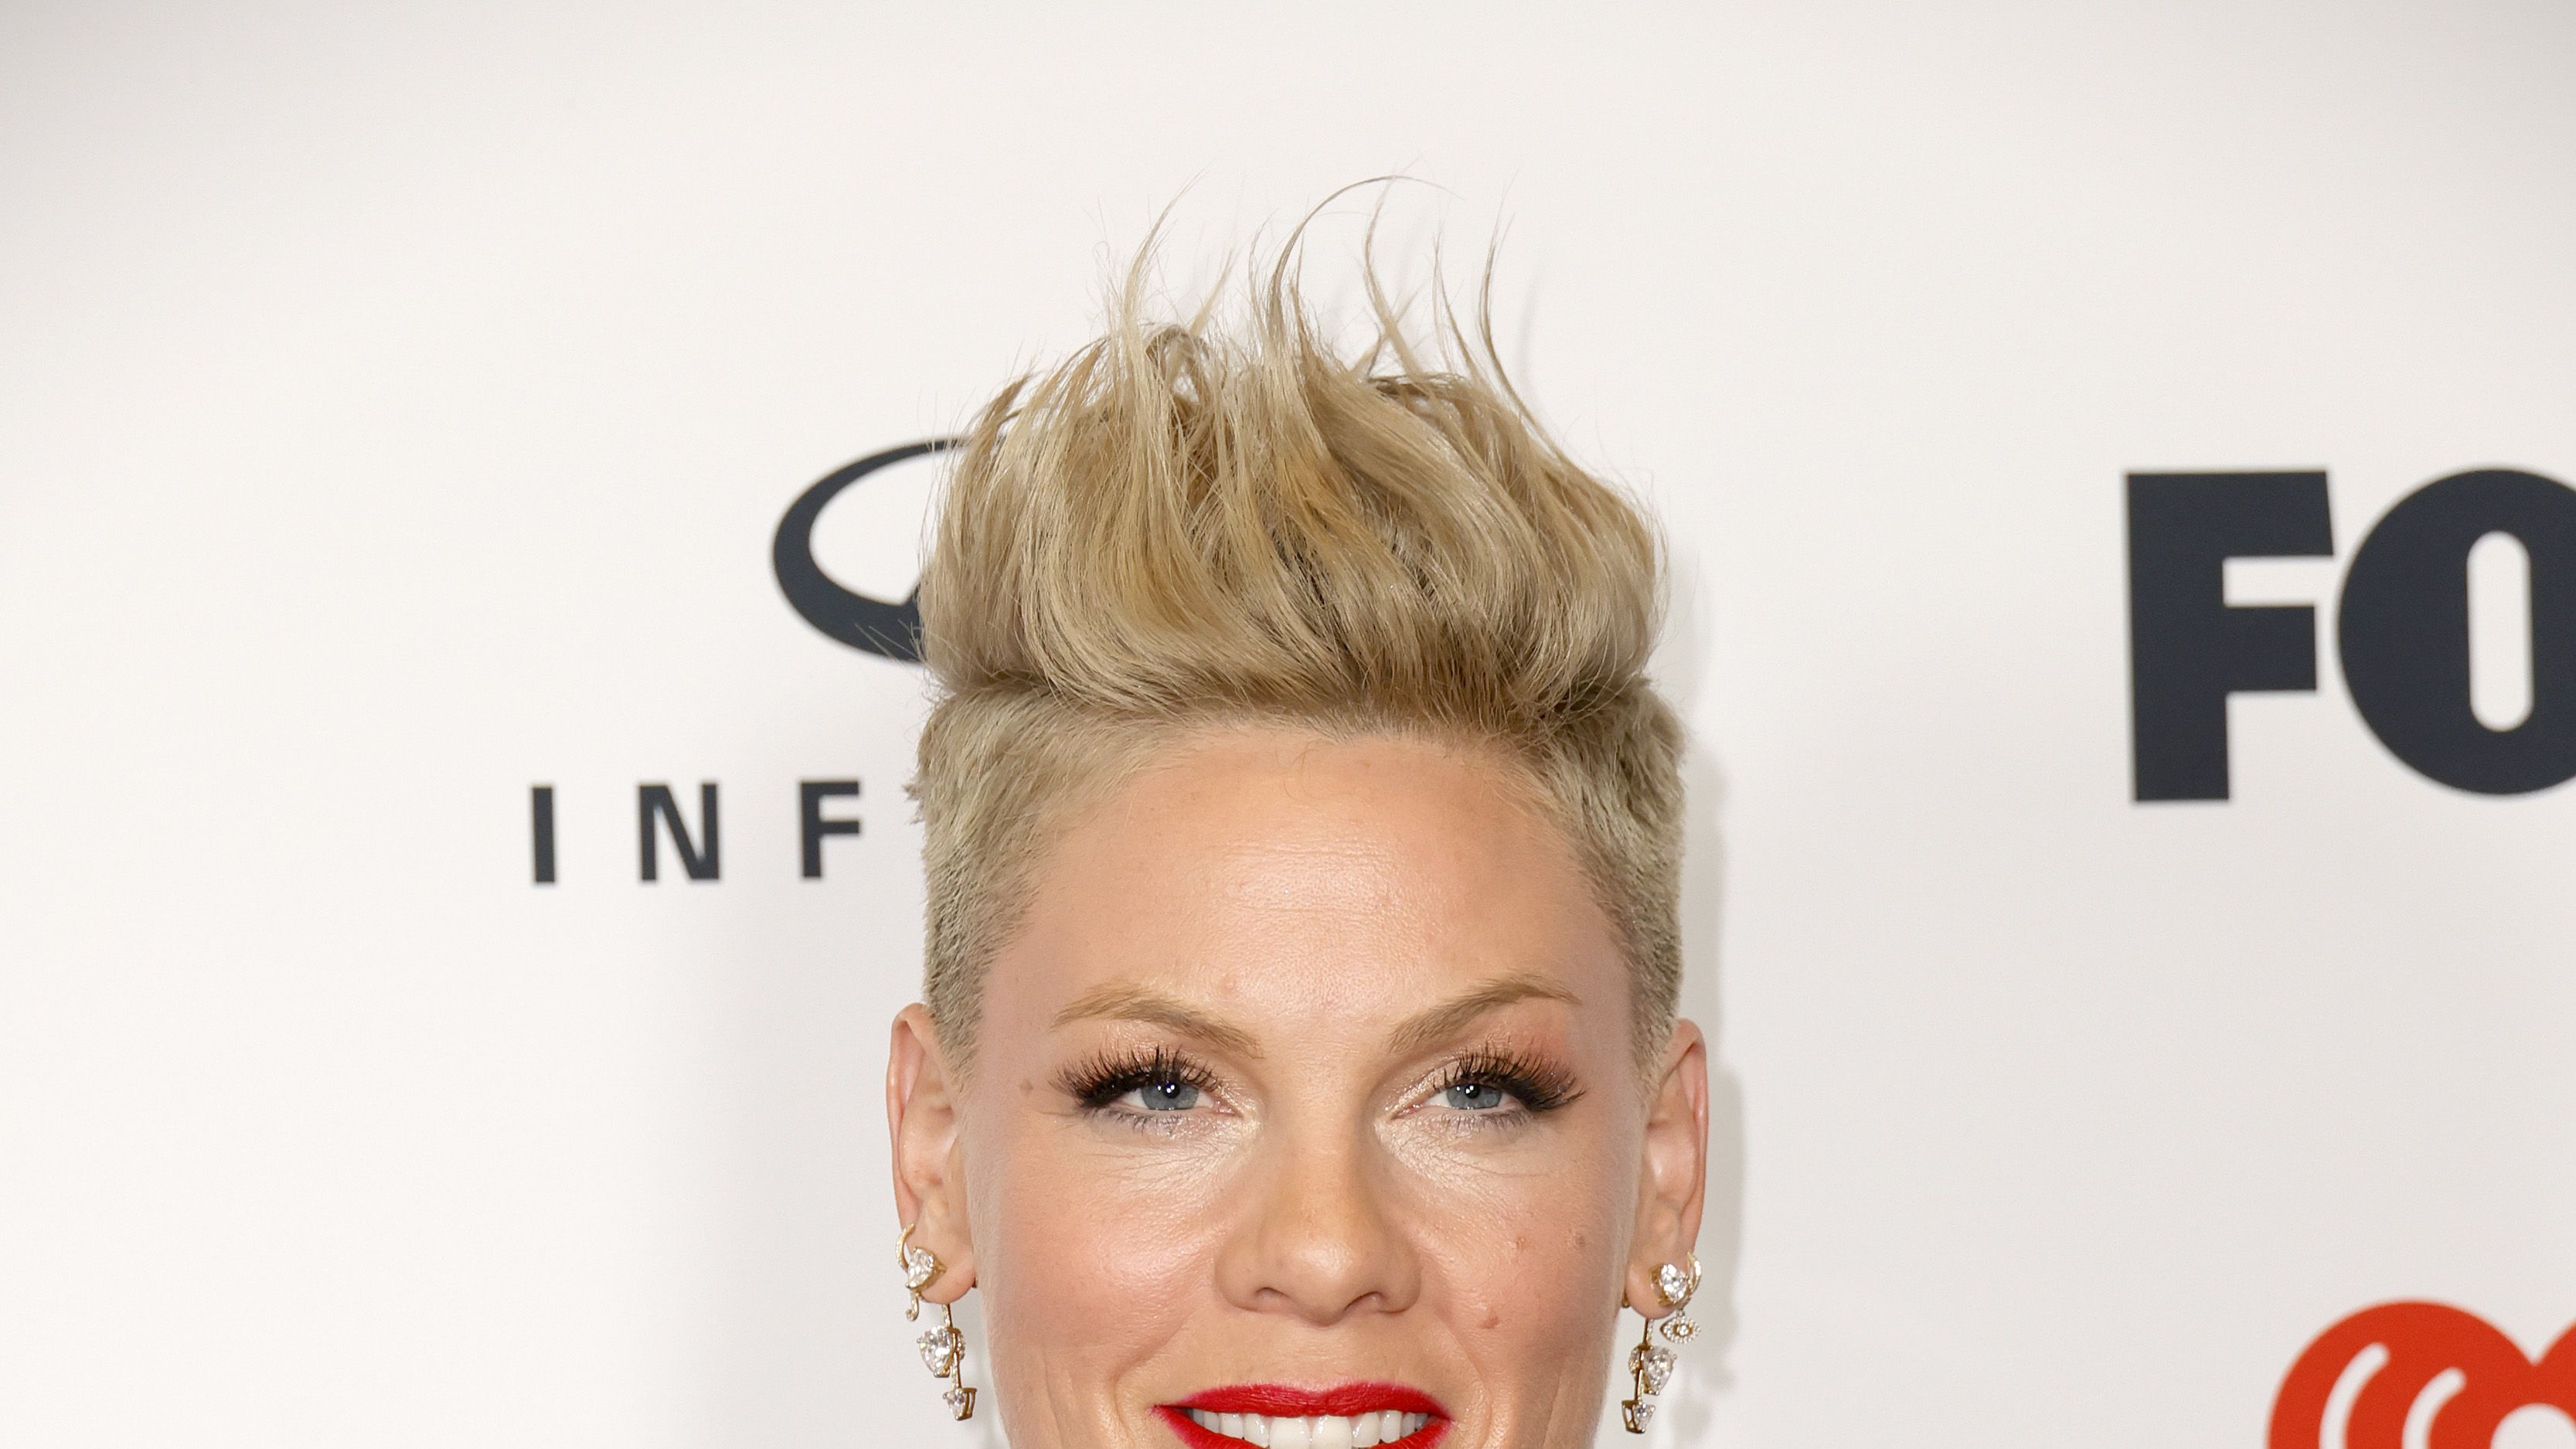 Pink Fans Are Thrilled After the Singer Shares Music News After Health Scare